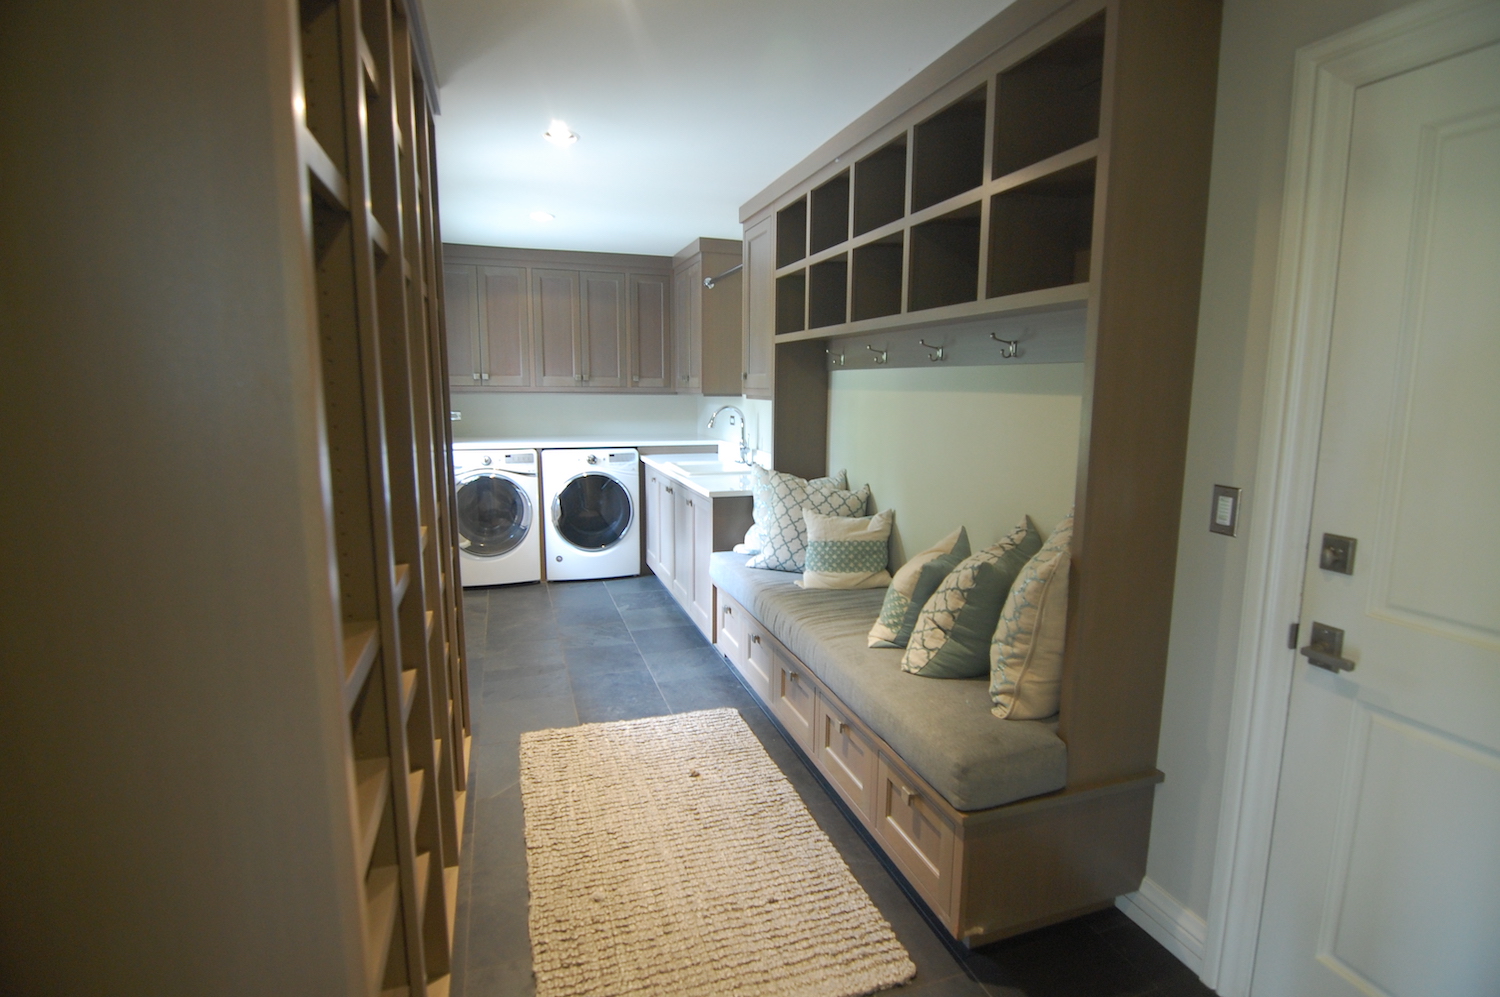 Edgecliff laundry room with built-in remodel